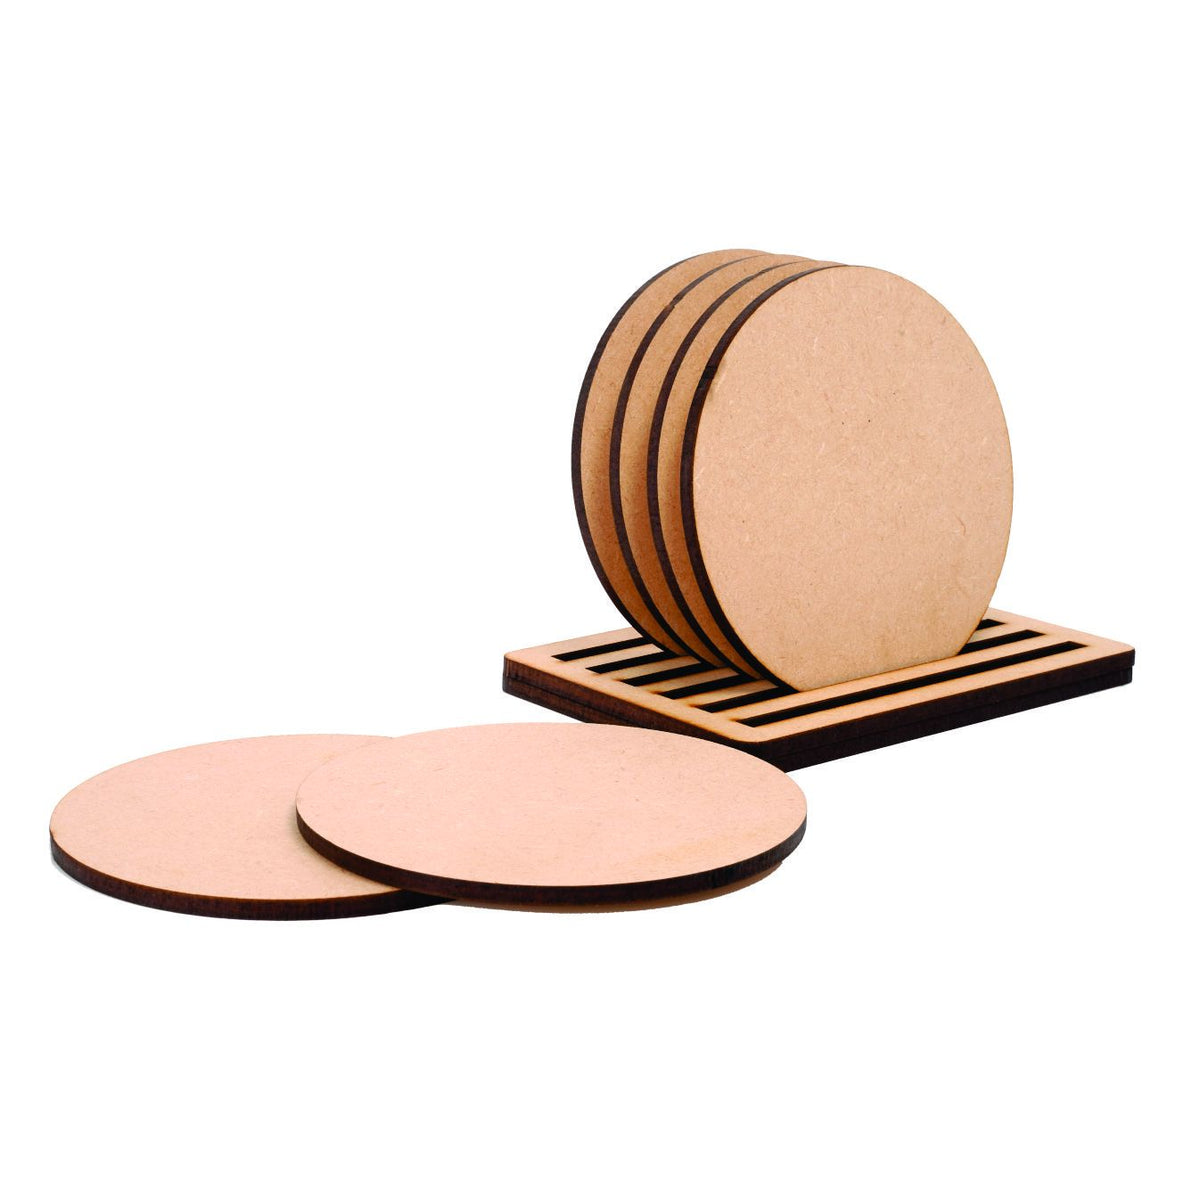 6 Pack Round Textured Print Wooden Coasters for Drinks and